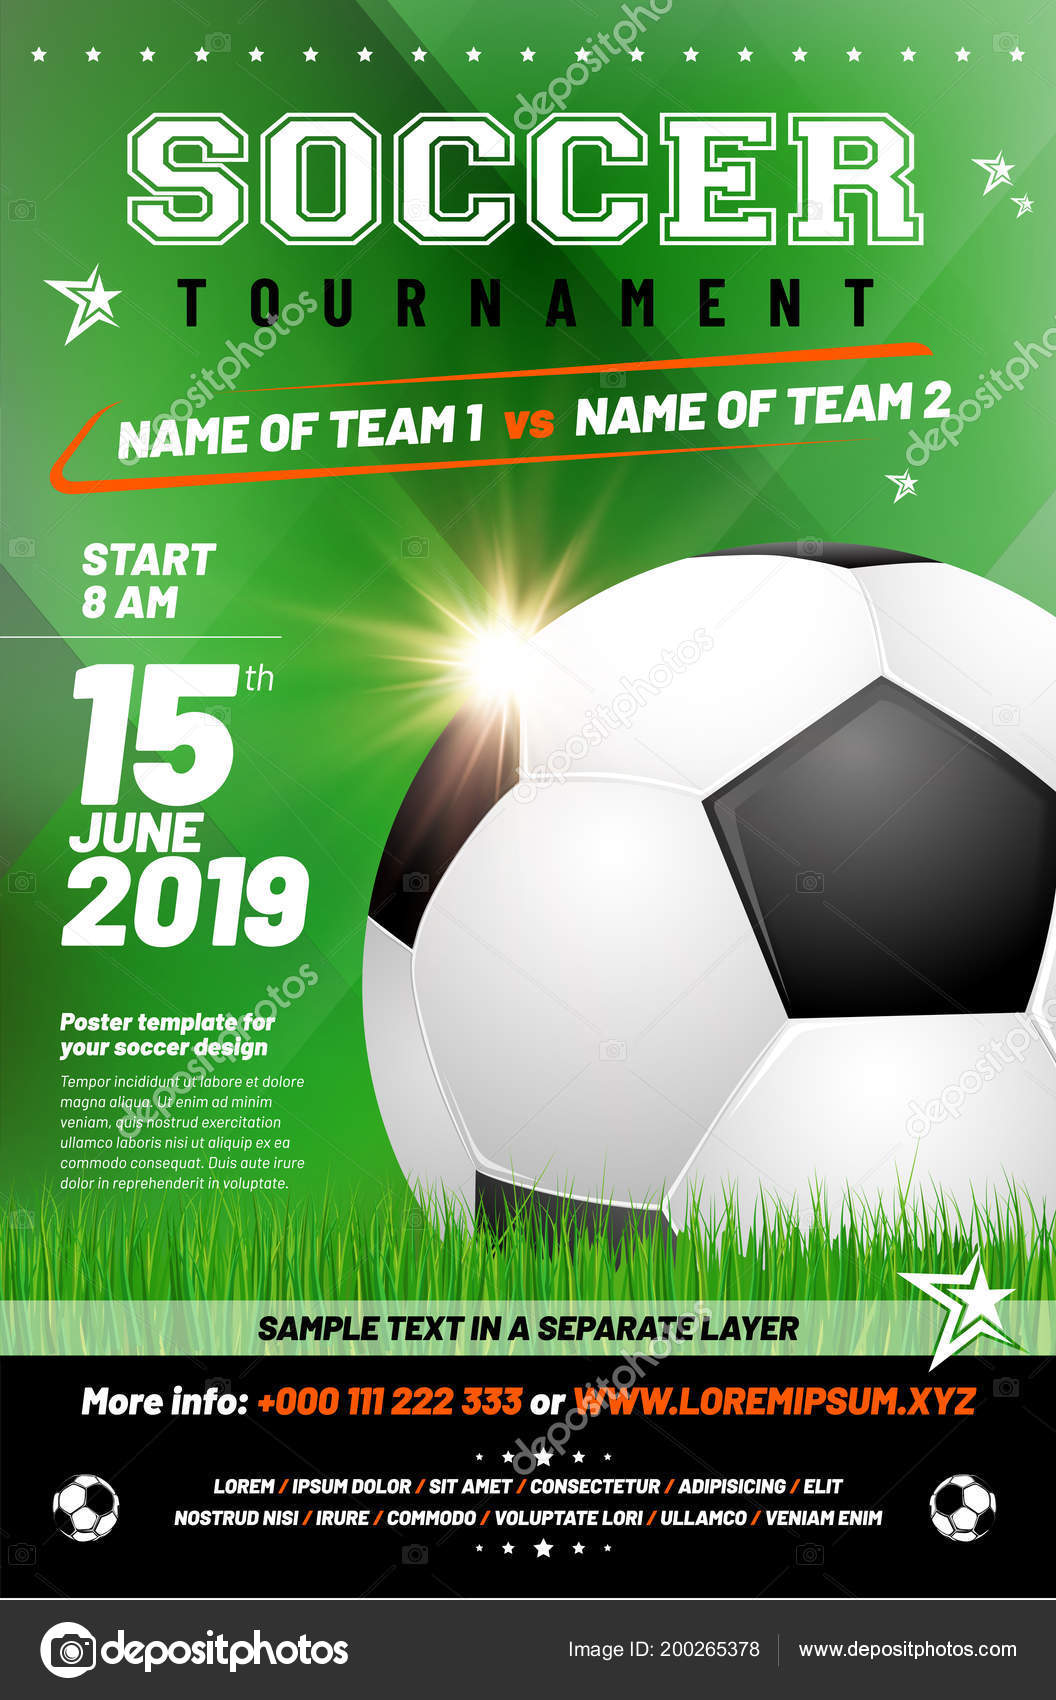 Soccer Tournament Poster Template Sample Text Separate Layer For Football Tournament Flyer Template